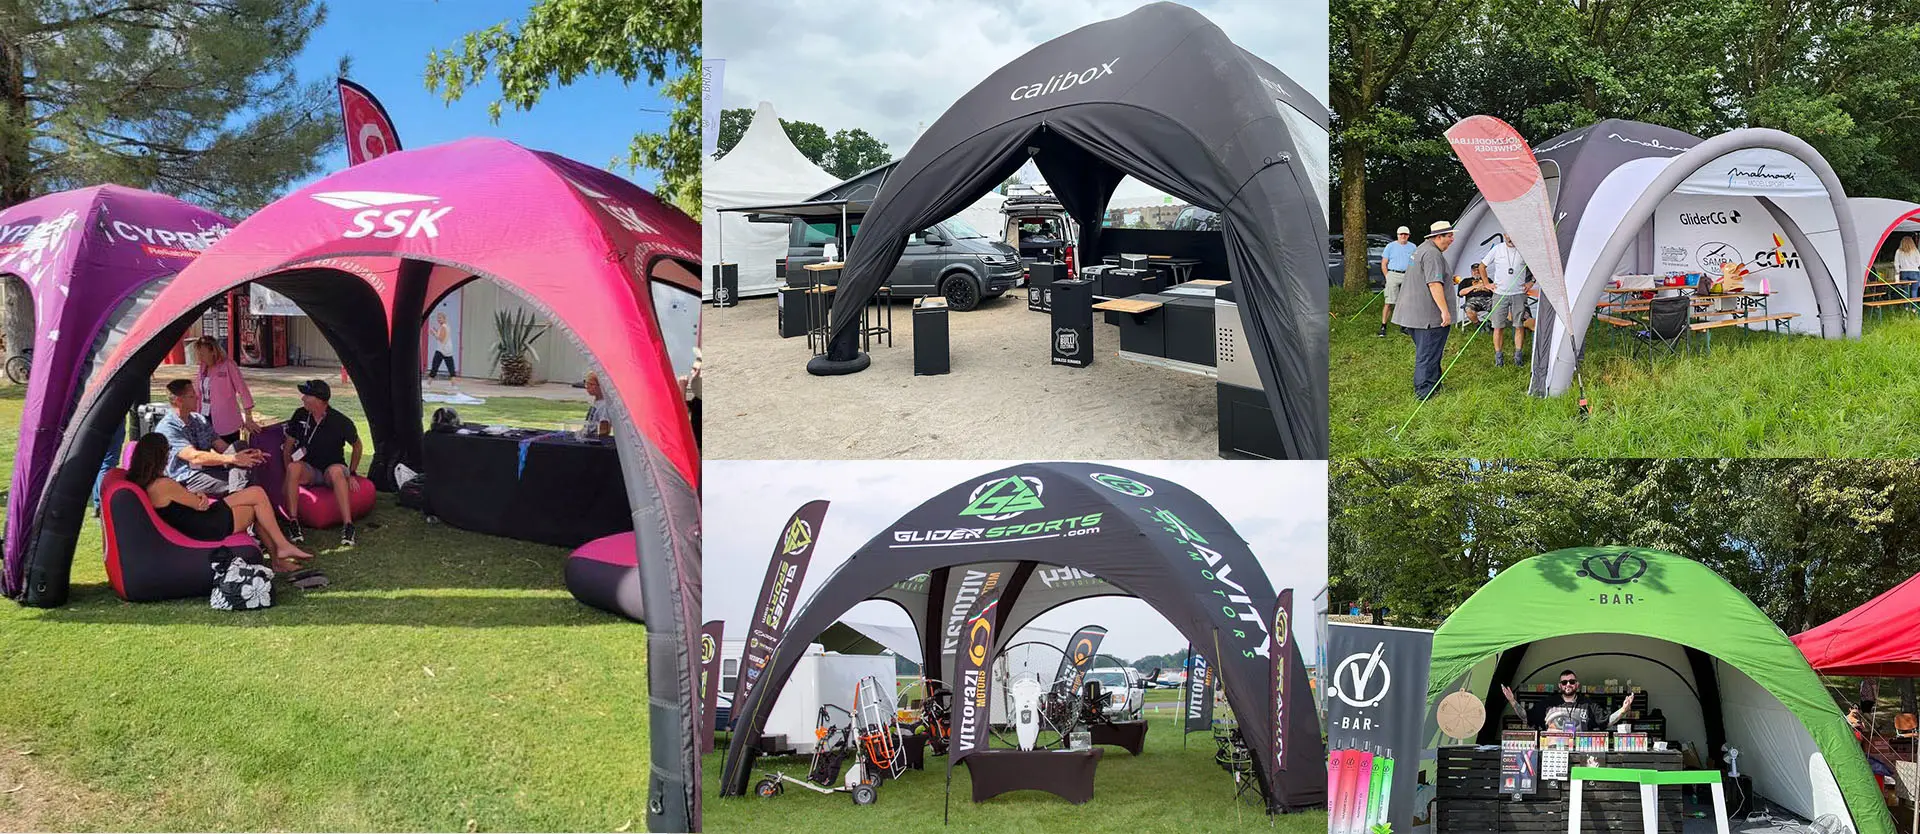 Future Trends in Inflatable Canopies The Inflatable Canopy industry is continuously evolving, with new trends emerging that enhance the functionality and appeal of these shelters. Some future trends to watch include: